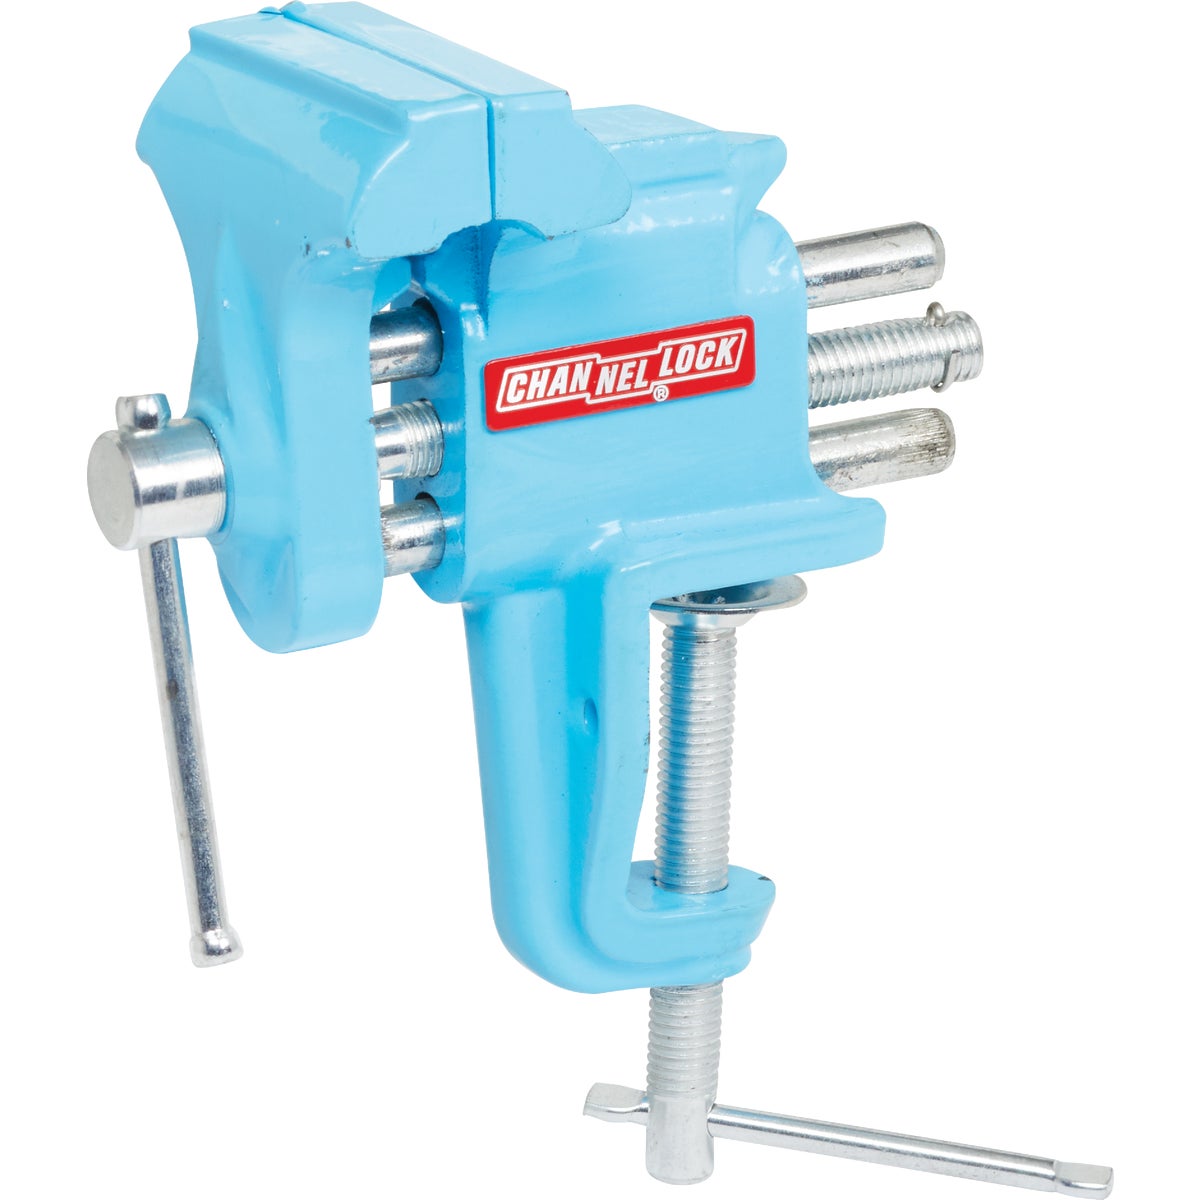 Channellock 3 In. Light-Duty Clamp-On Vise